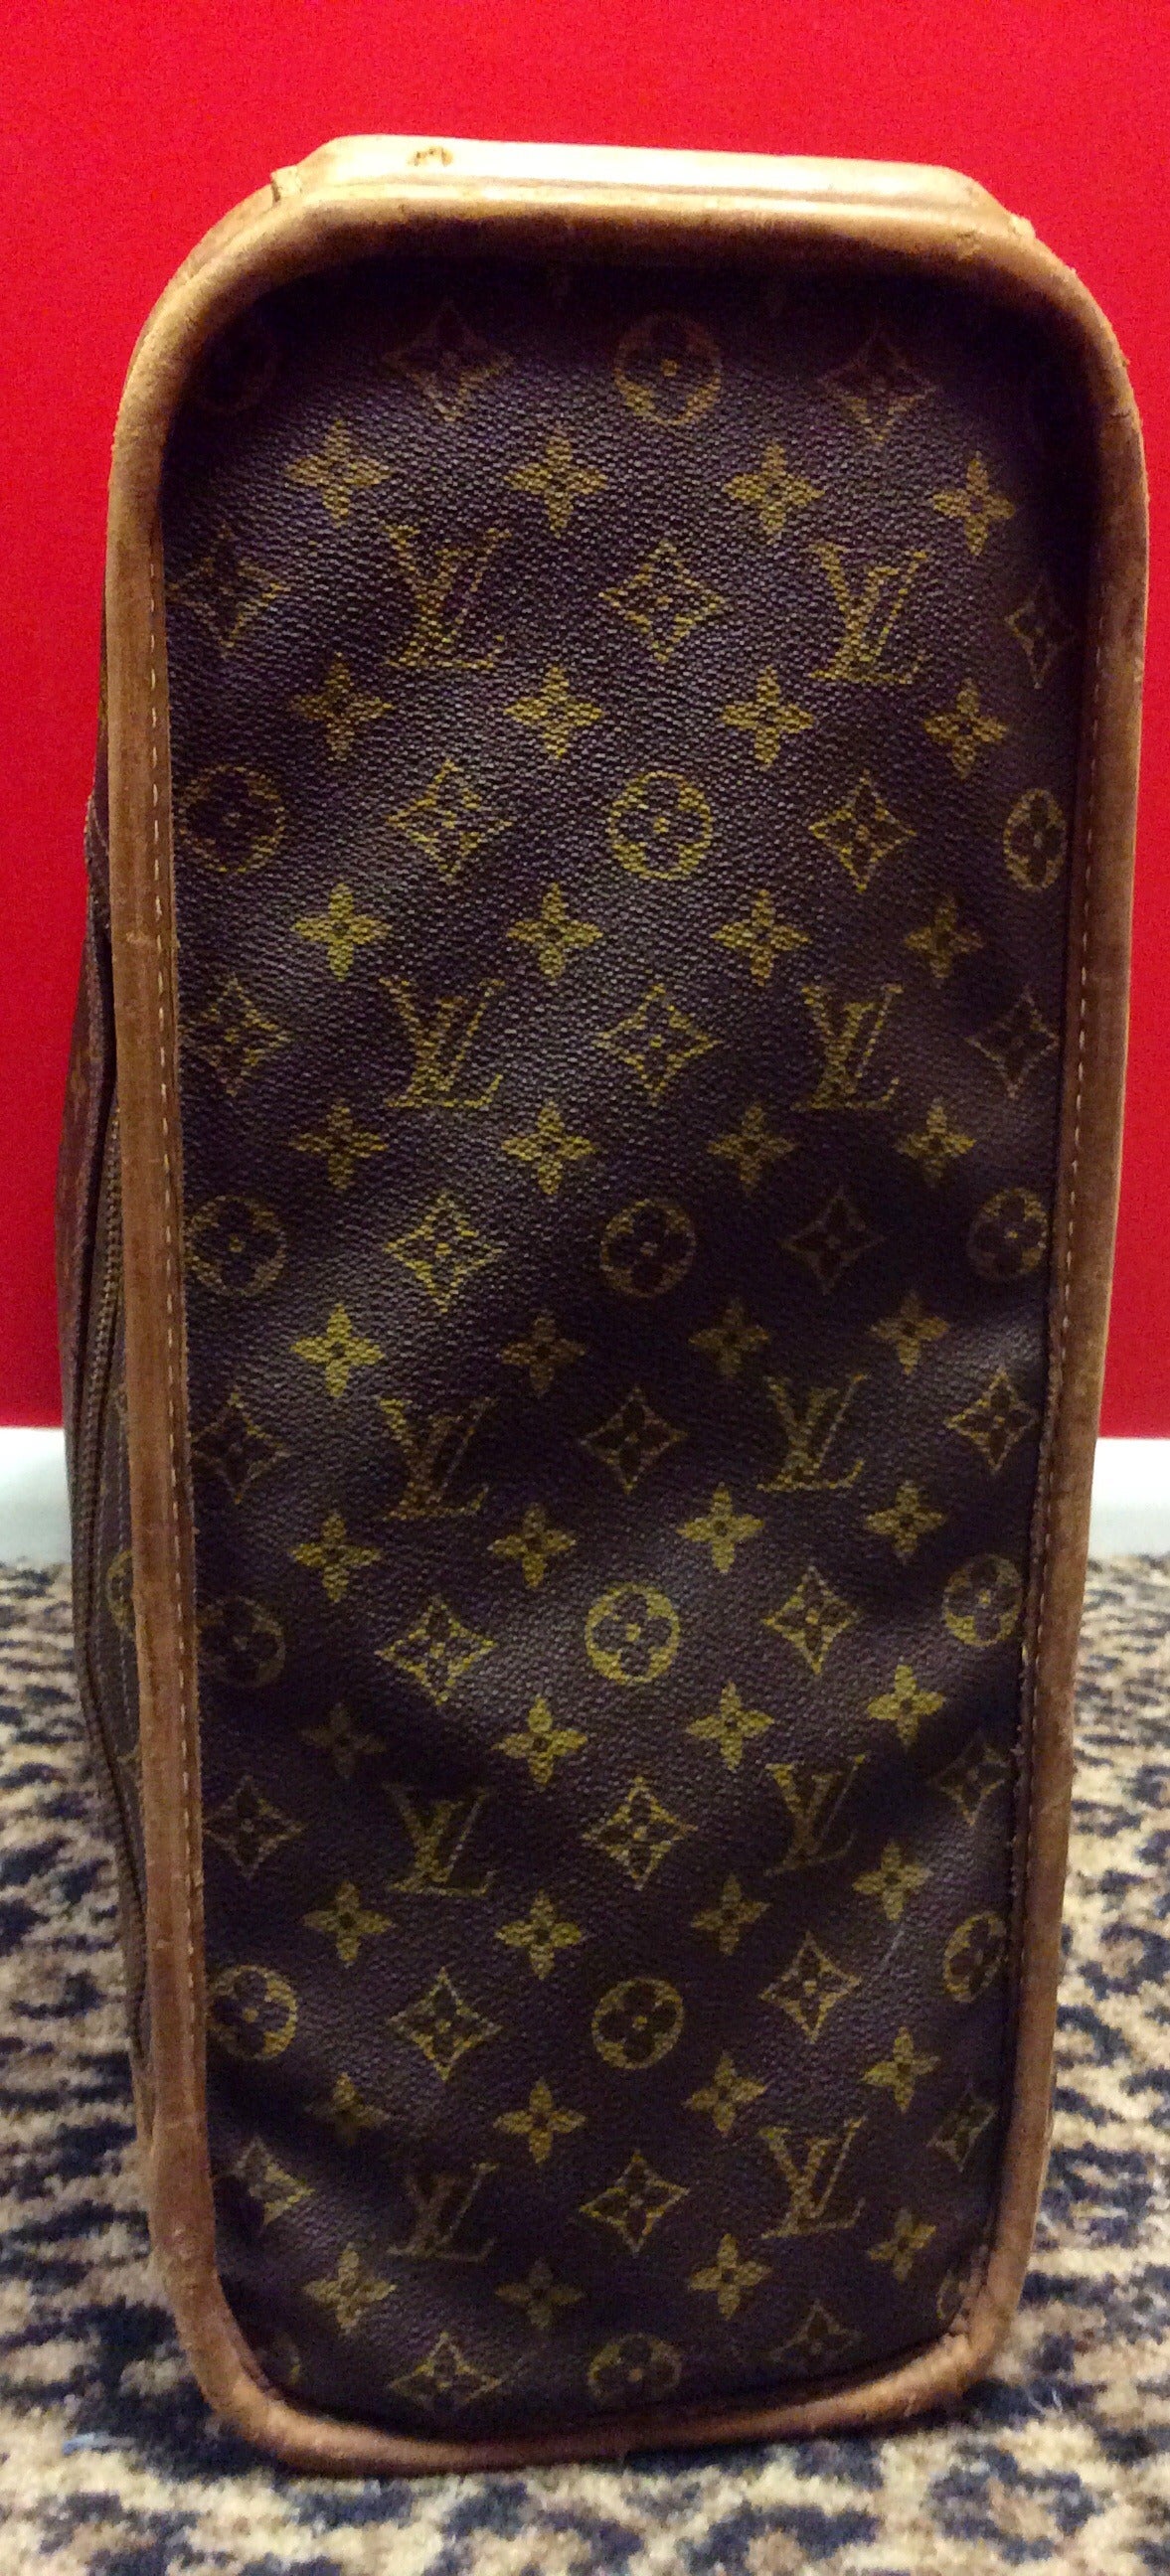 Vintage Louis Vuitton French Company Monogram Luggage Suitcase For Sale 1